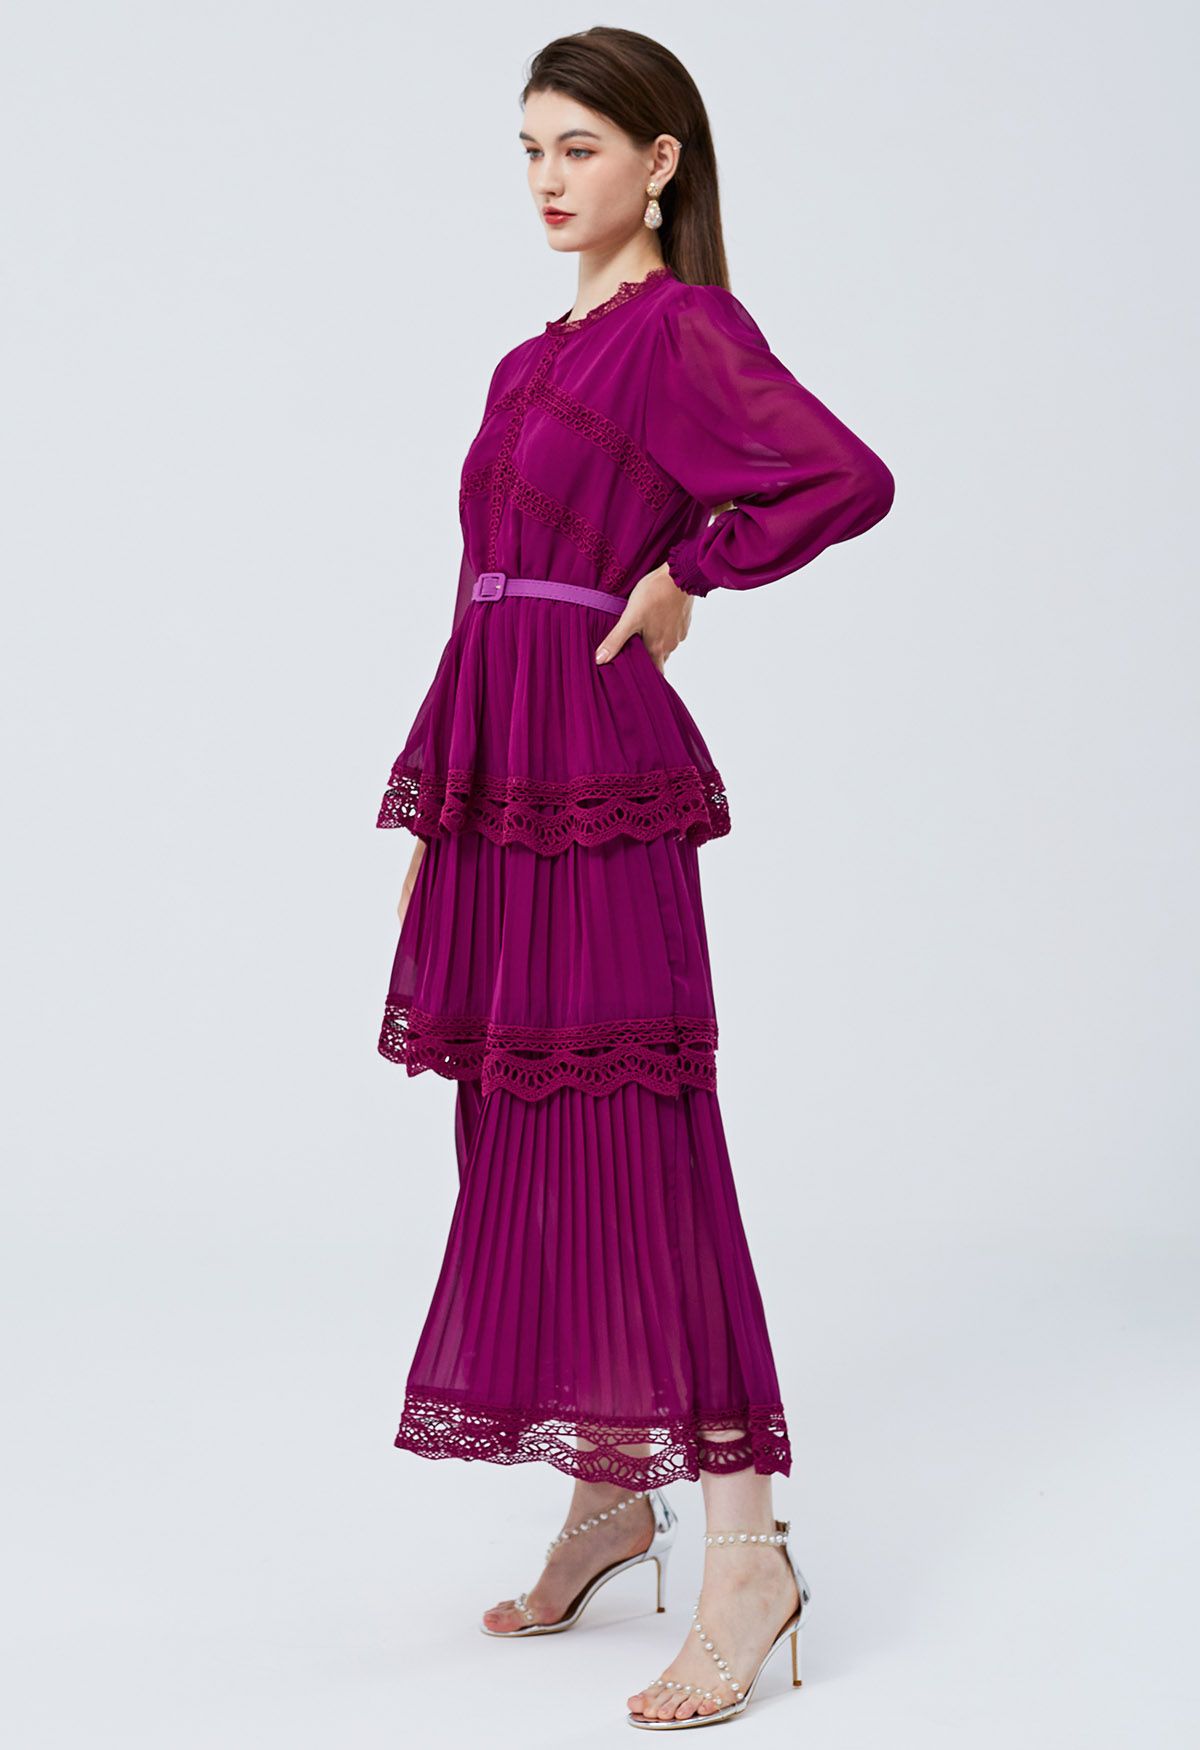 Crochet Lace Pleated Tiered Chiffon Maxi Dress in Burgundy